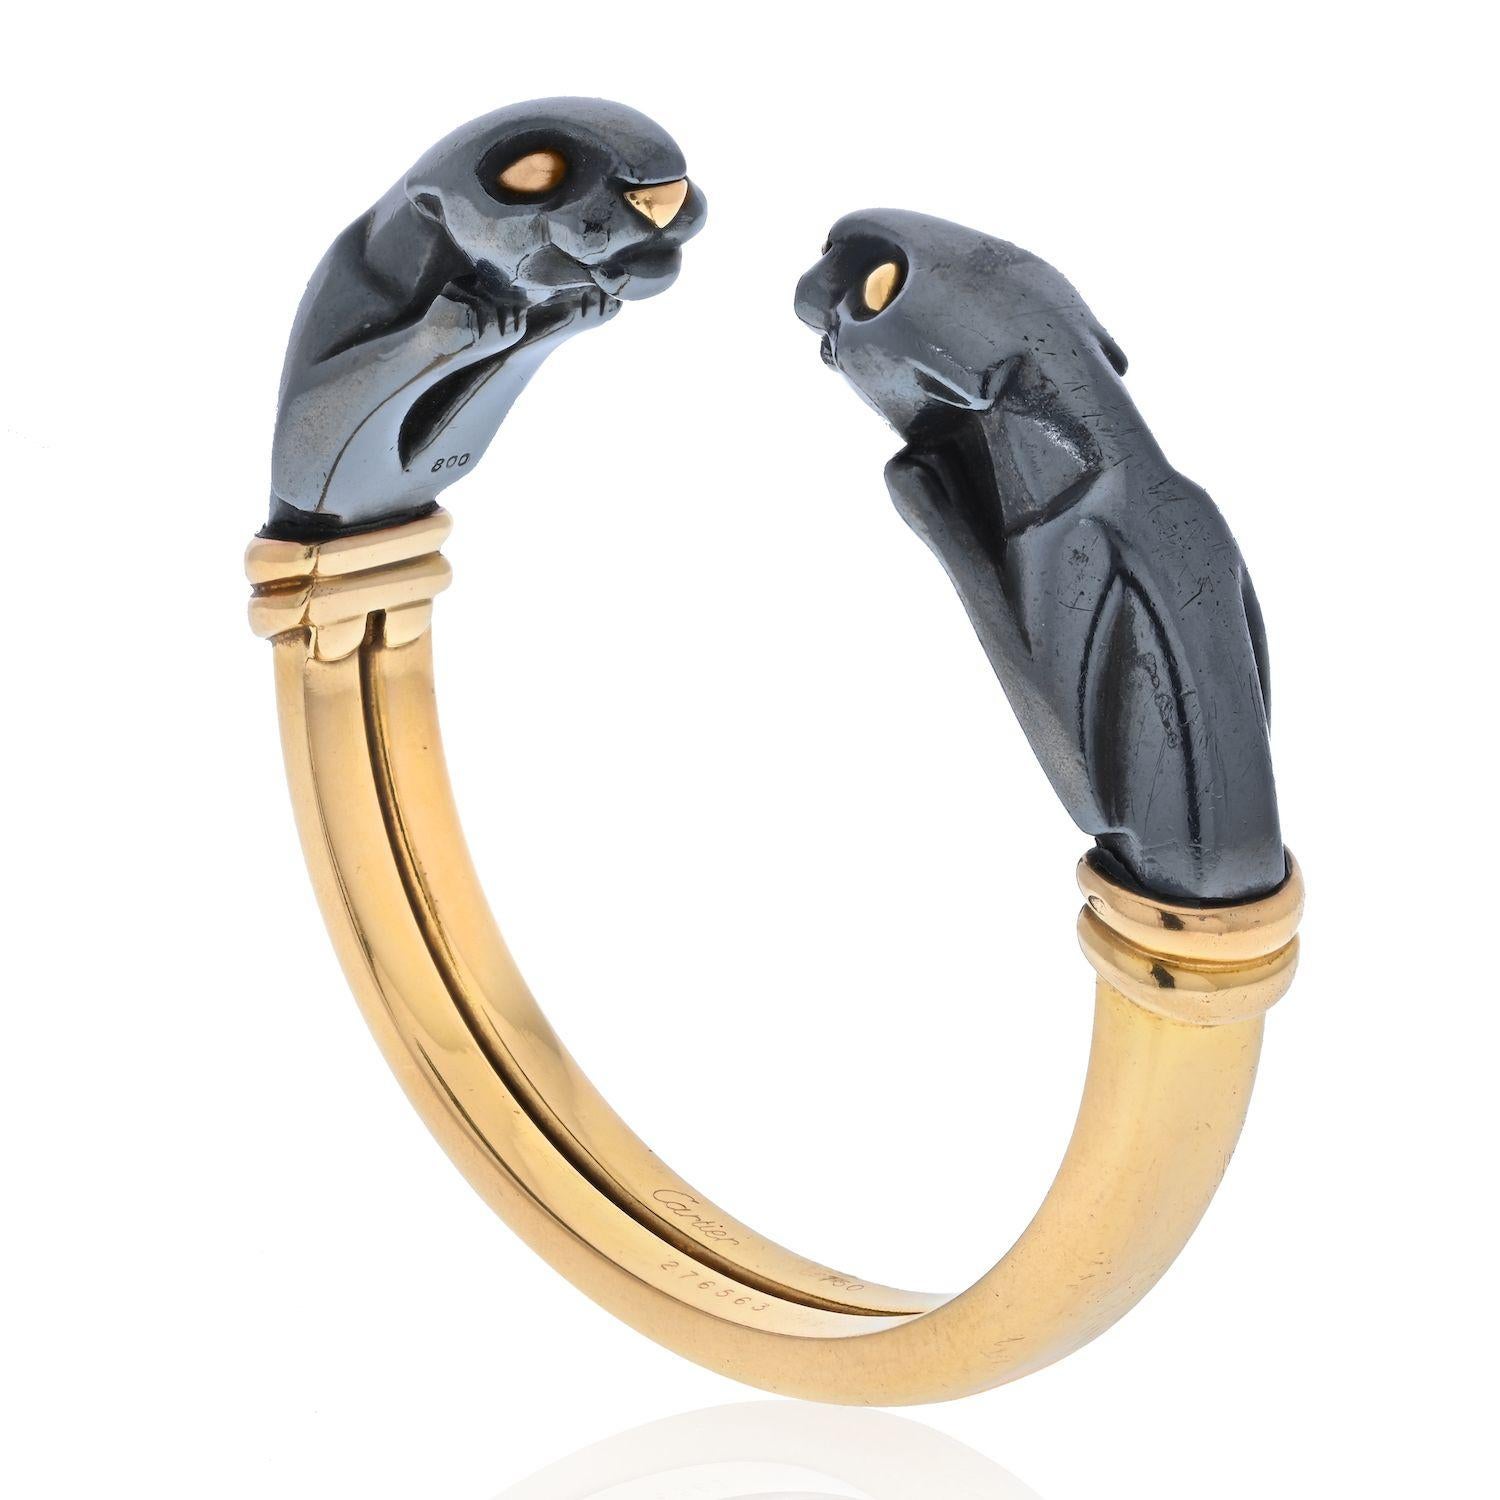 An 18k yellow gold and hematite cuff bracelet from the Panthere de Cartier collection. The bracelet is composed of 2 hematite Panther heads facing each other, joined together by the polished yellow gold cuff. The bracelet would fit a wrist size of